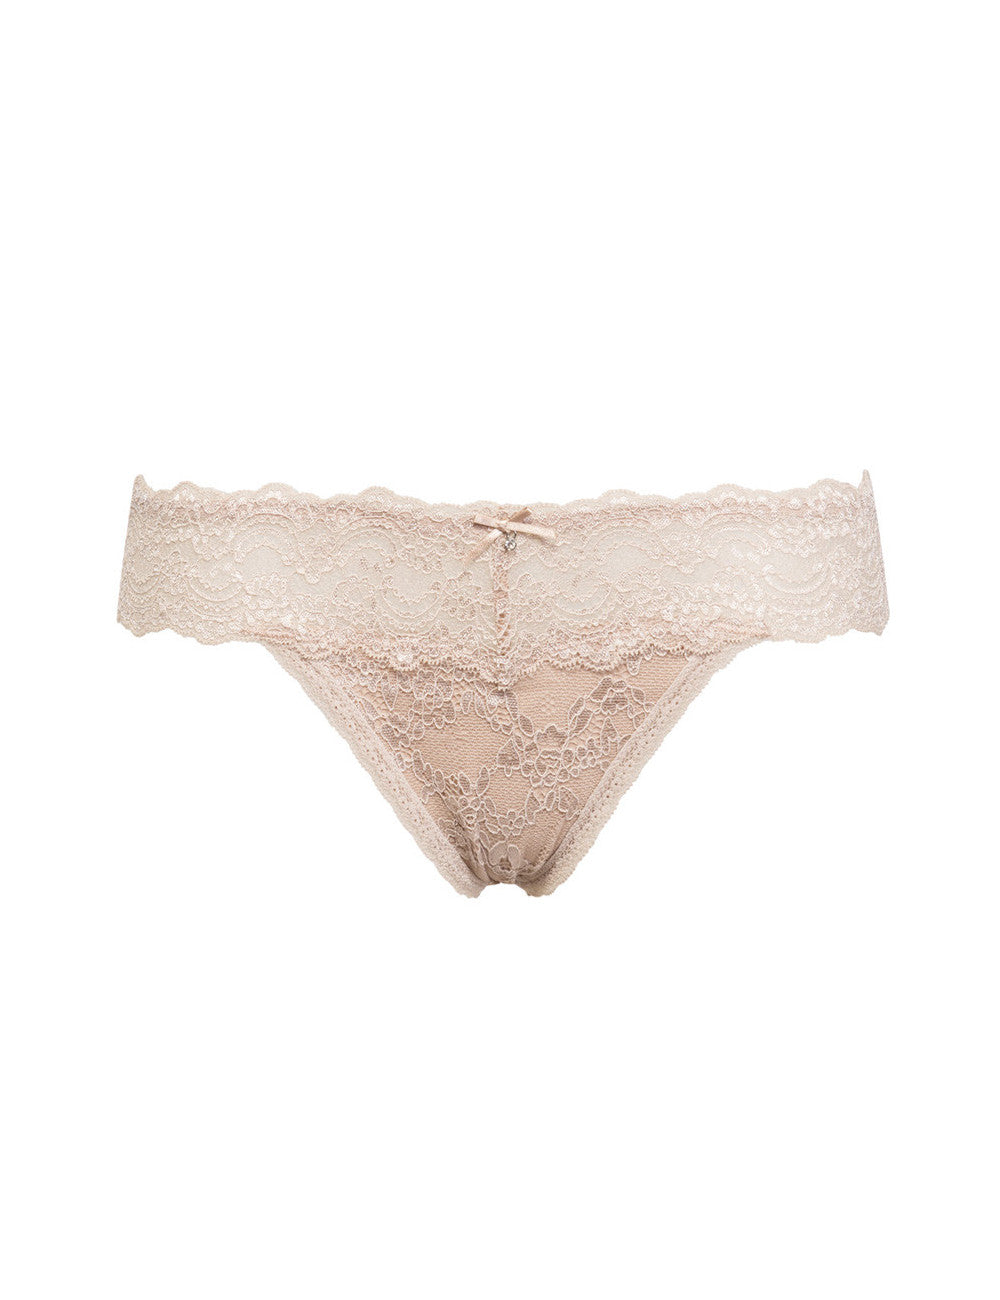 This thong from the Vanity line by SIeLEI italy offers a lightweight and comfortable design.